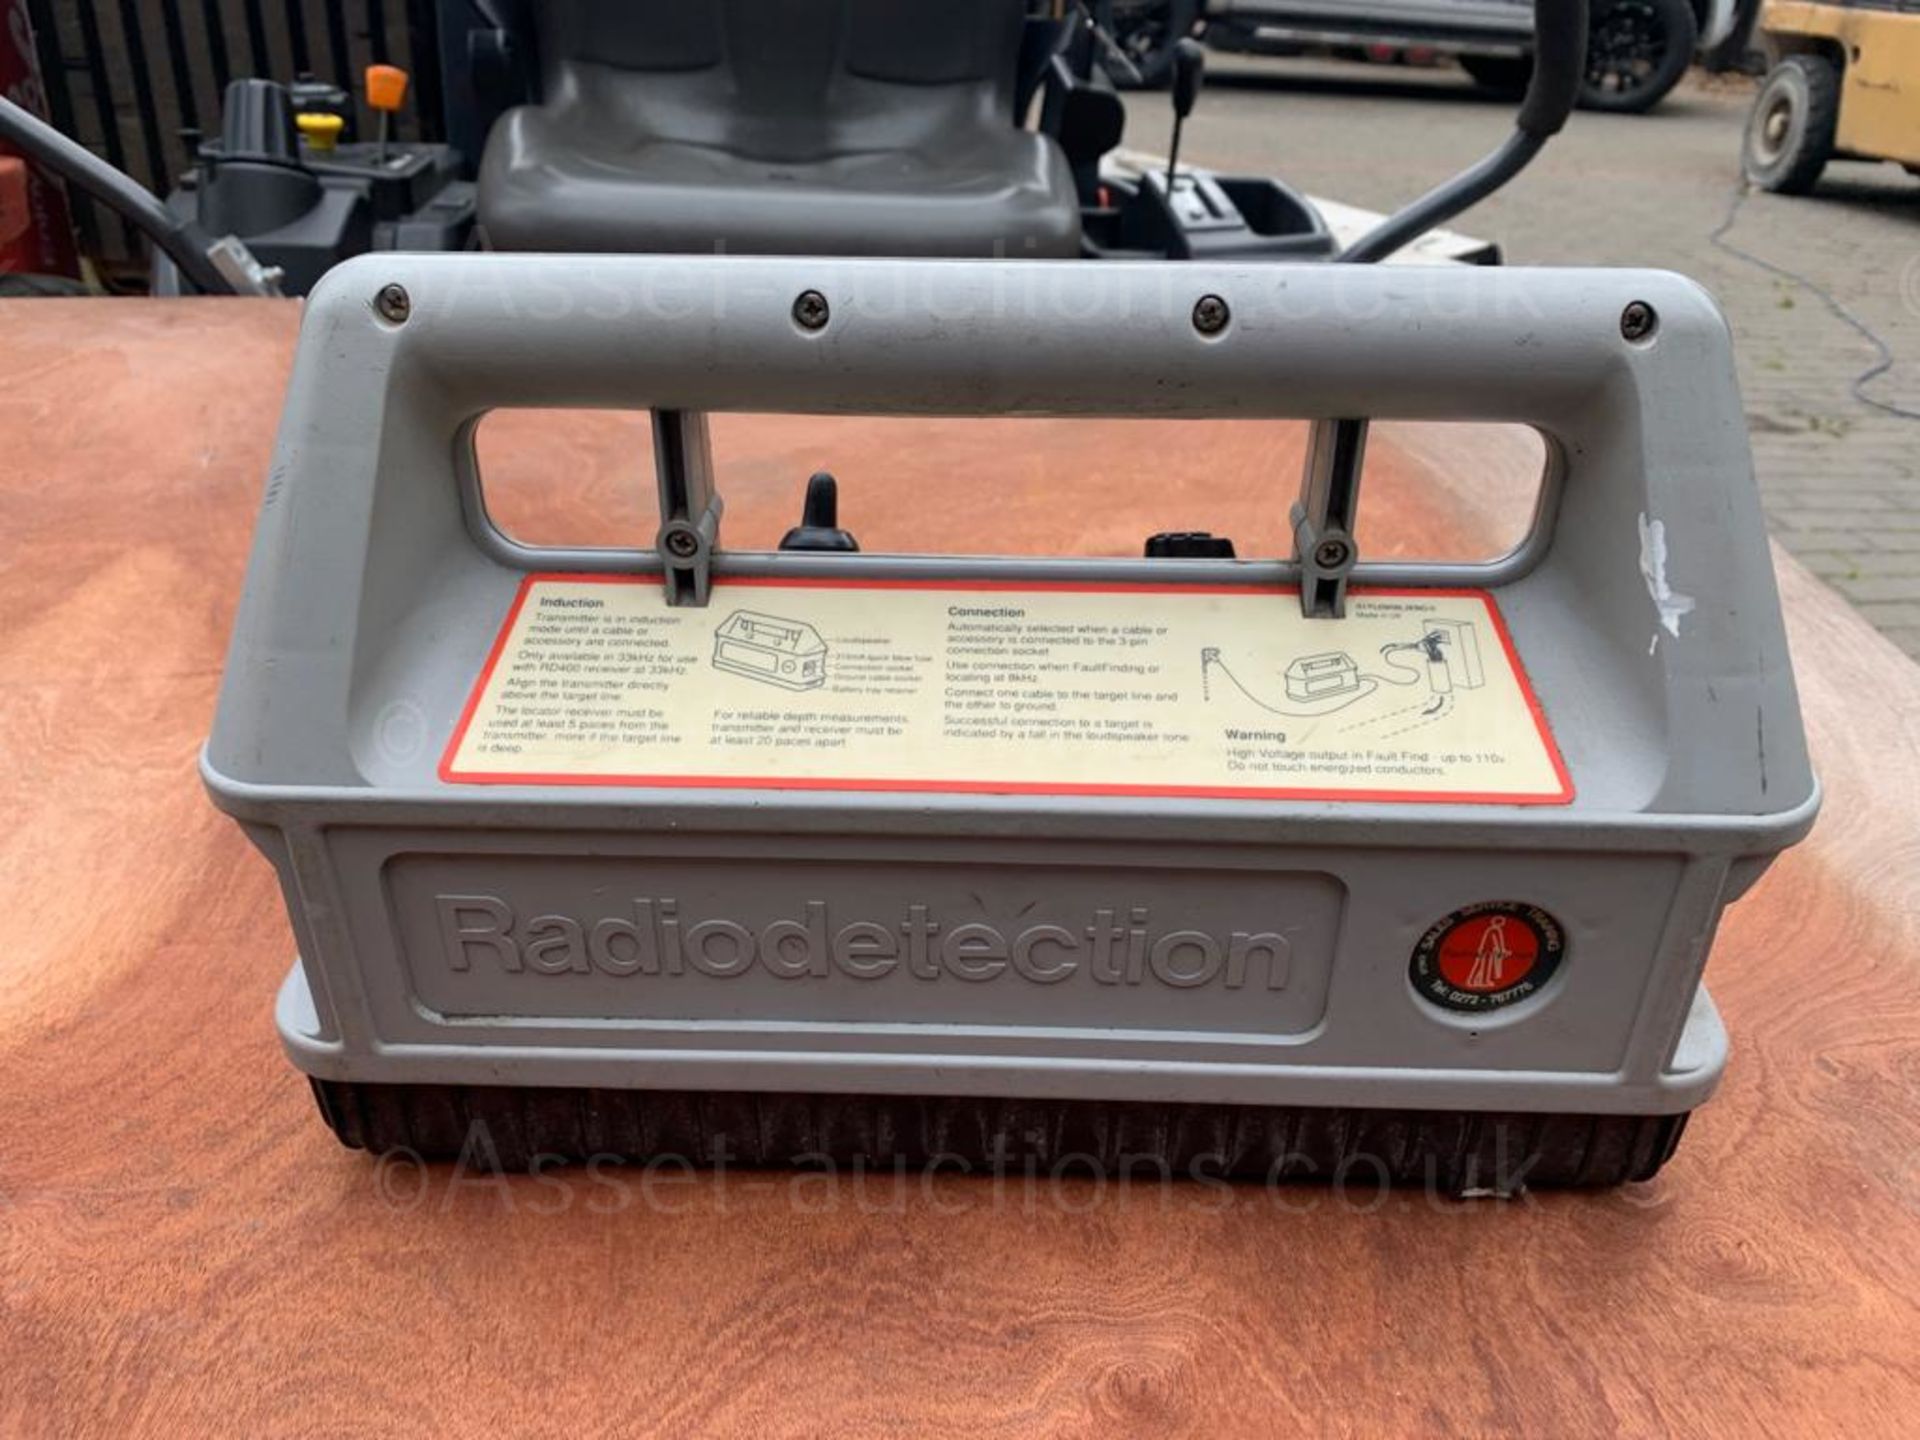 RADIO DETECTION RD400 FFTX PRECISION LOCATER WITH TRANSMITTER *PLUS VAT*